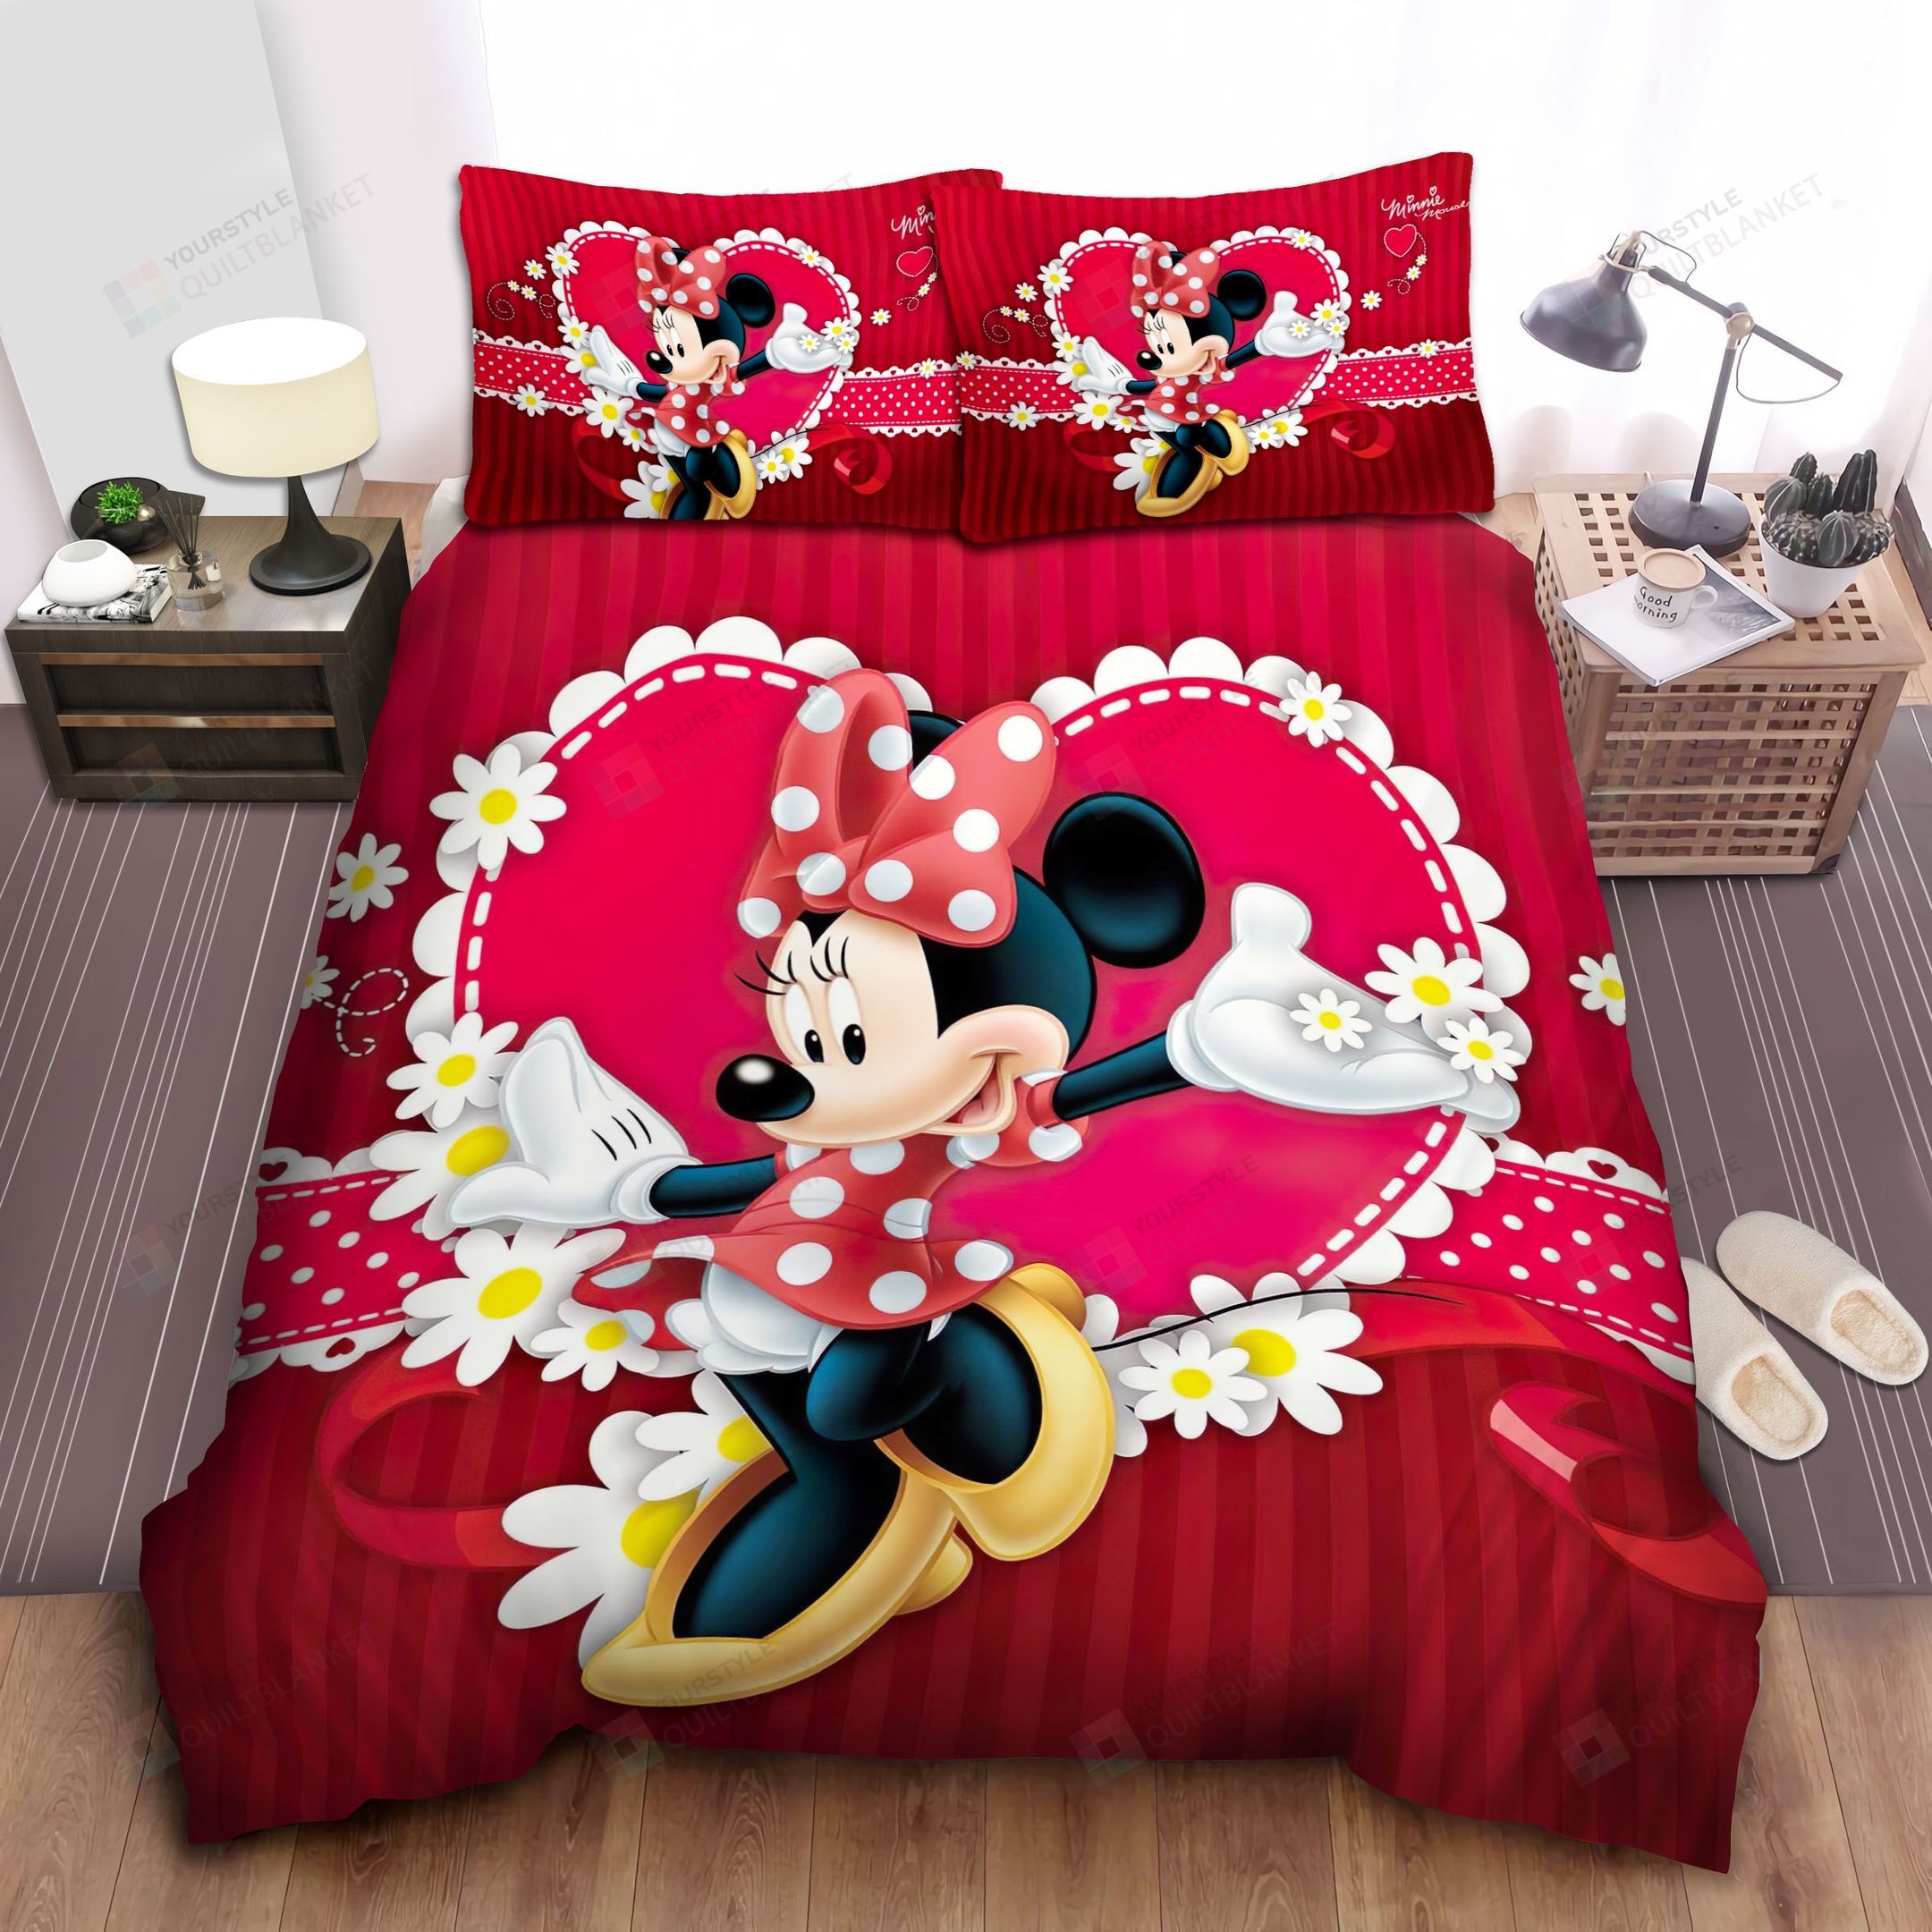 Minnie Mouse And Daisy Bed Sheets Spread Comforter Duvet Cover Bedding Sets